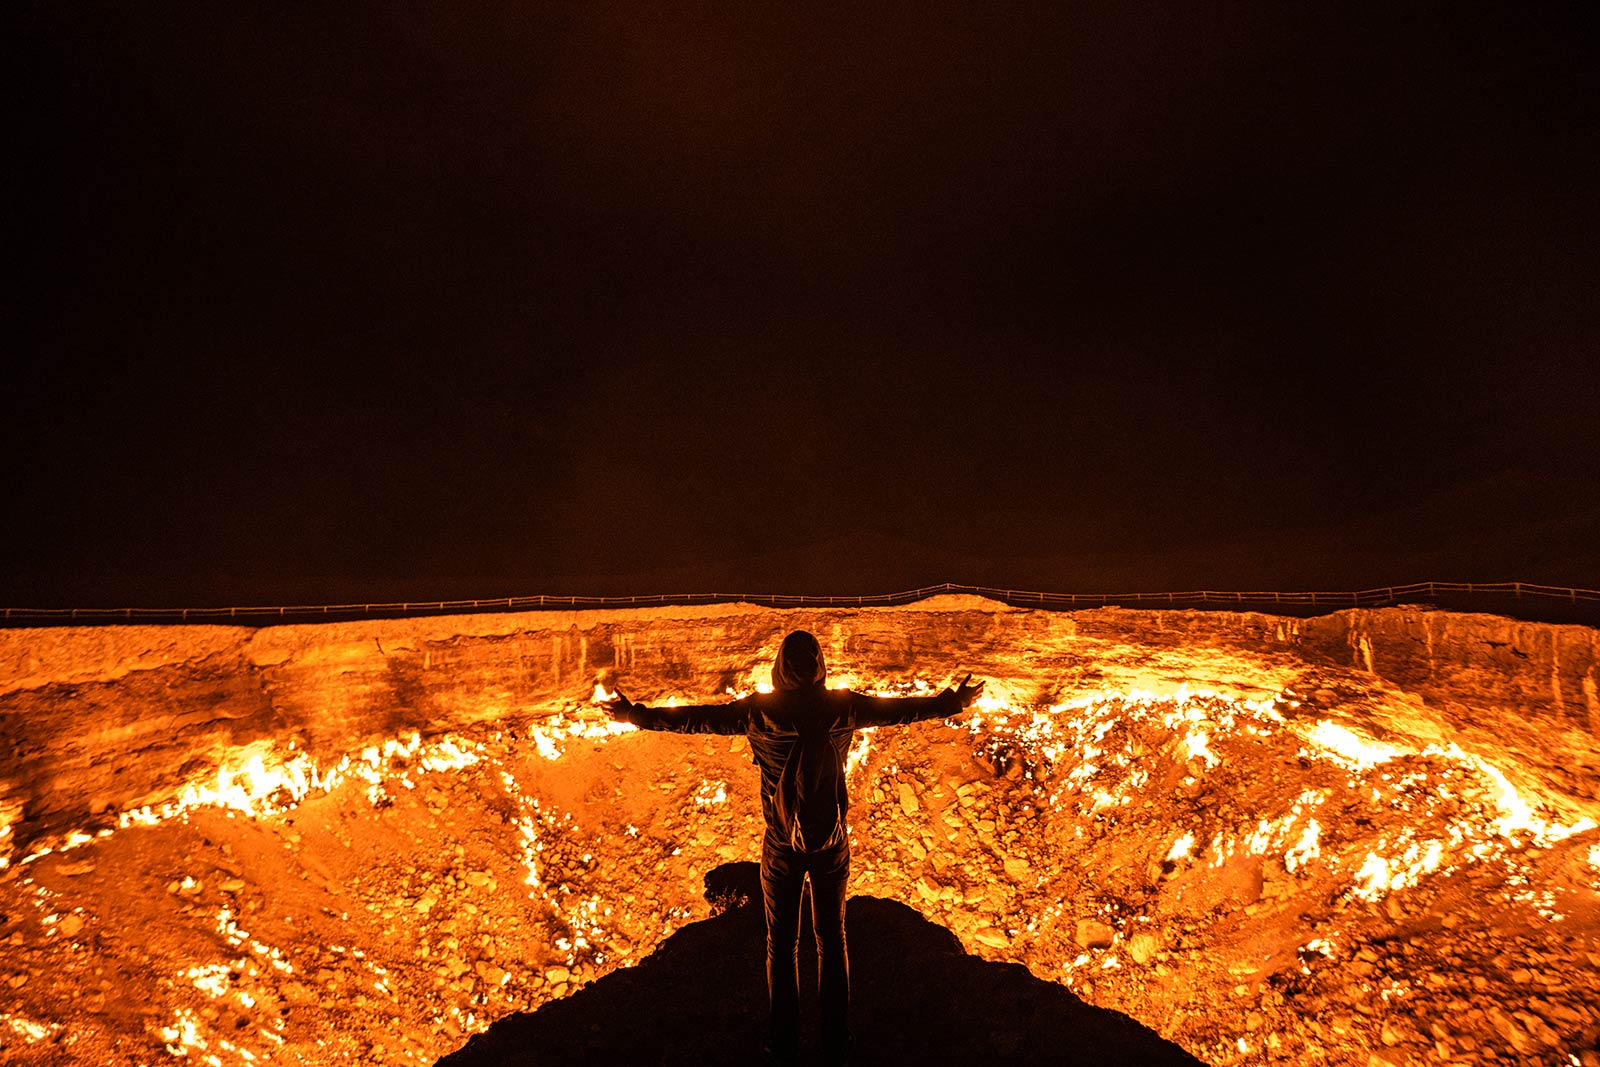 David Simpson and the gas crater in Darvaza, Turkmenistan. The gates of hell